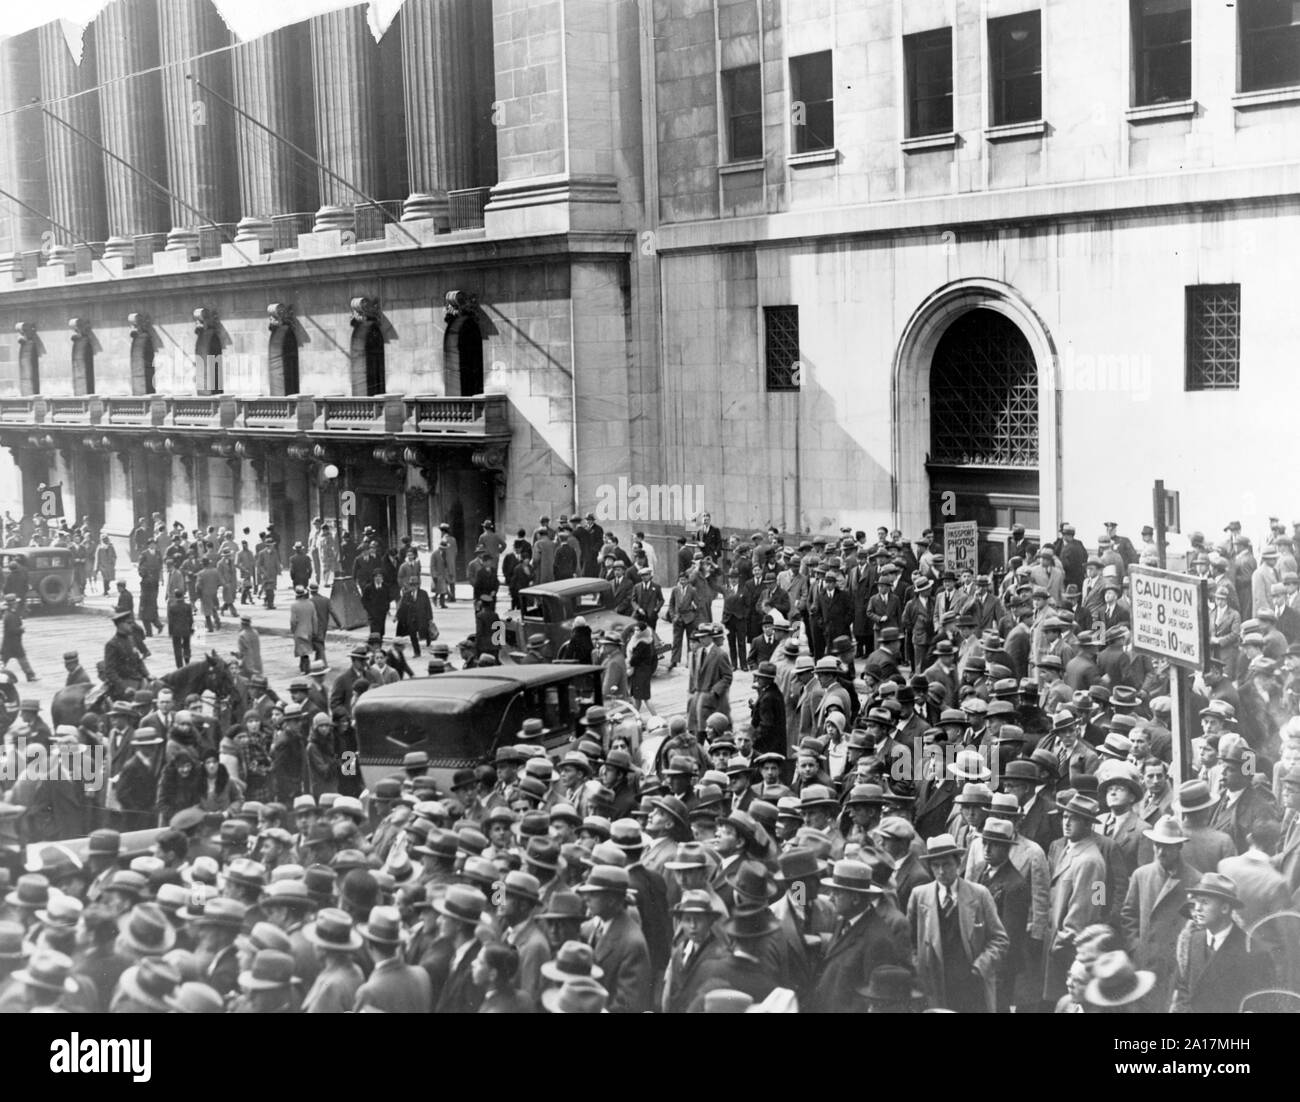 Crowd of people gather outside the New York Stock Exchange following the Crash of 1929. The Wall Street Crash of 1929, also known as te Stock Market Crash 1929 or the Great Crash, was a major stock market crash that occurred in late October 1929 Stock Photo